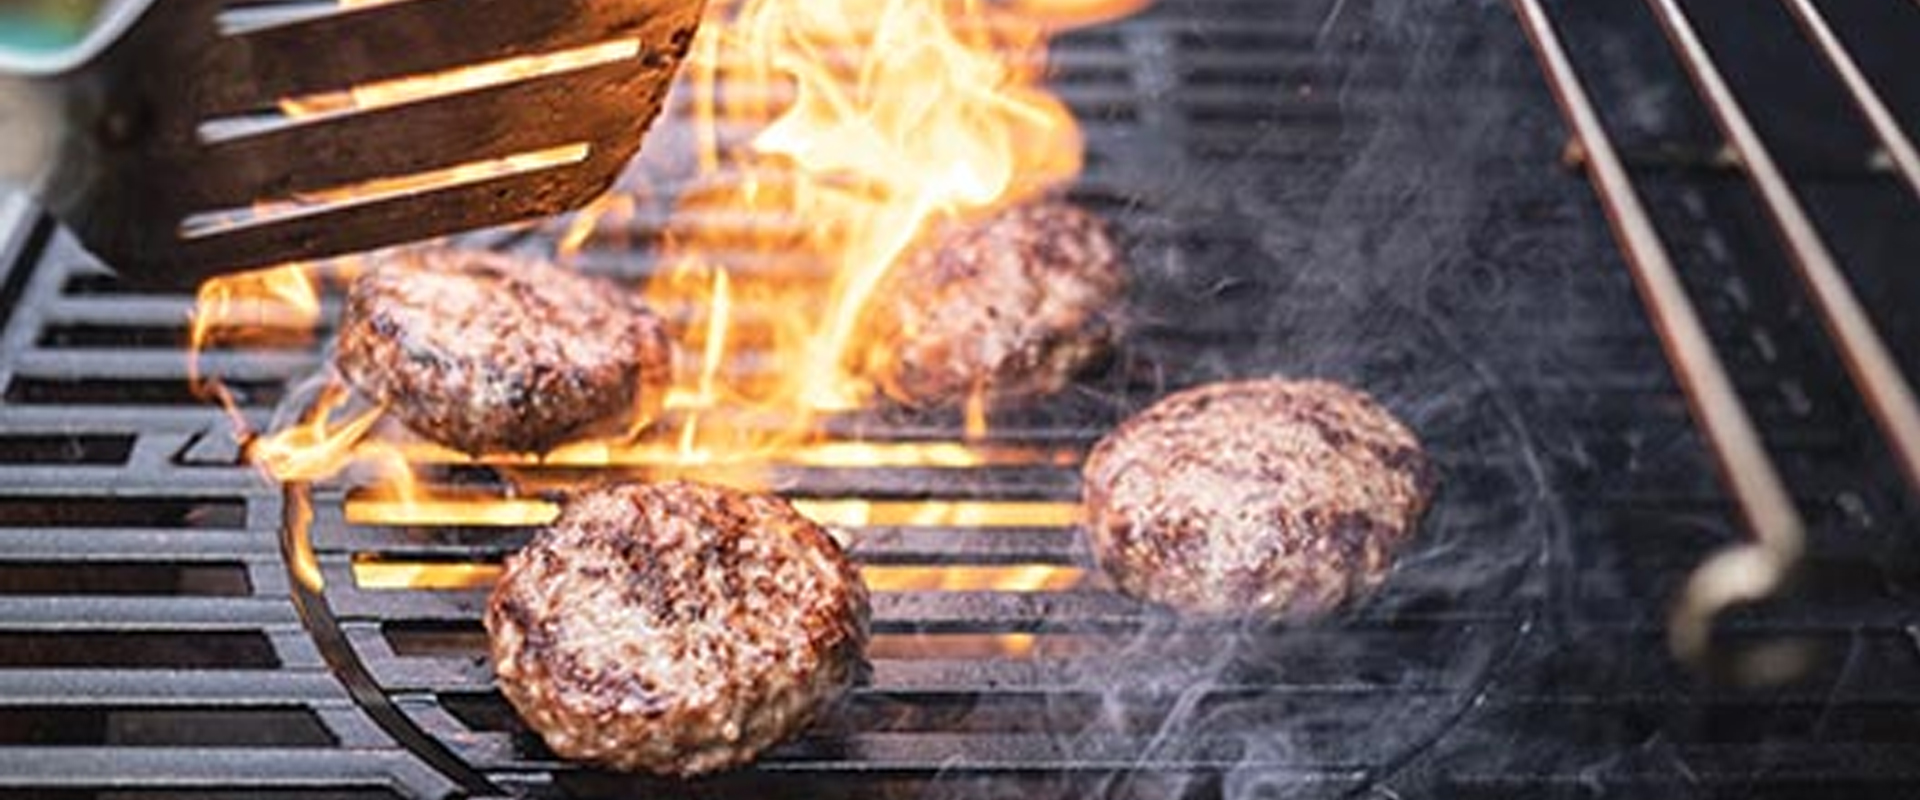 Burgers flaming on a barbeque